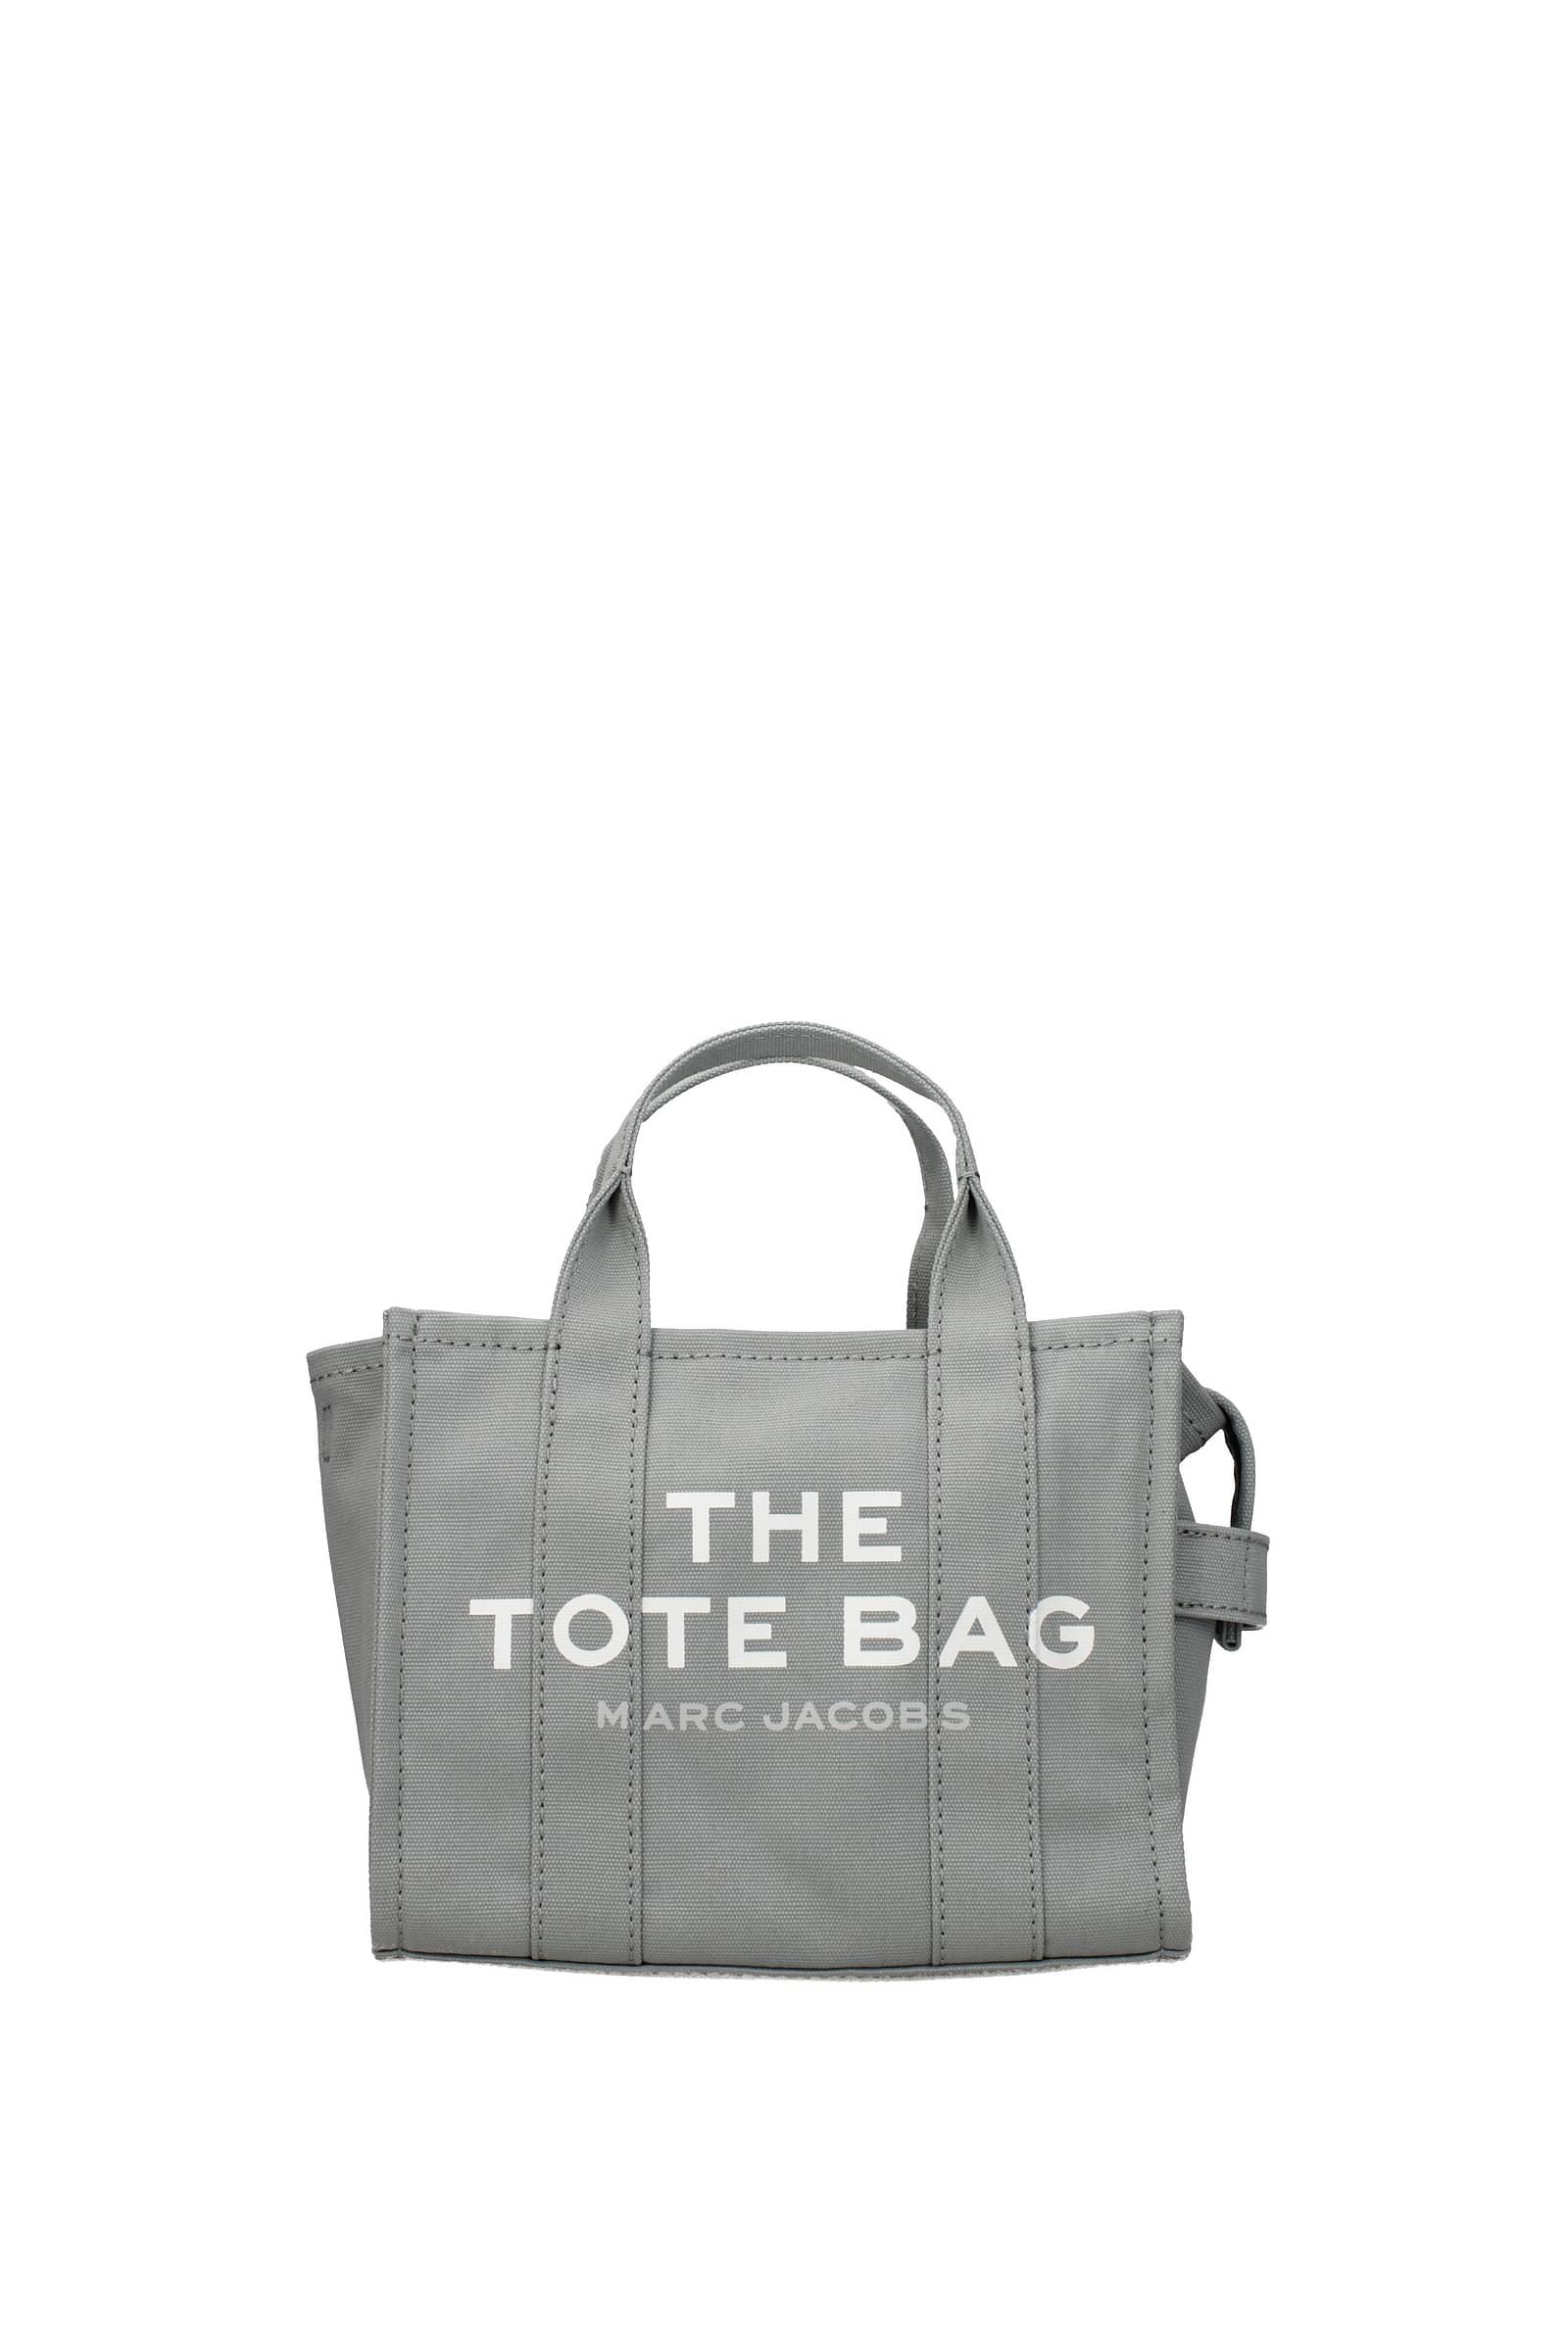 The Canvas Tote Bag, Marc Jacobs